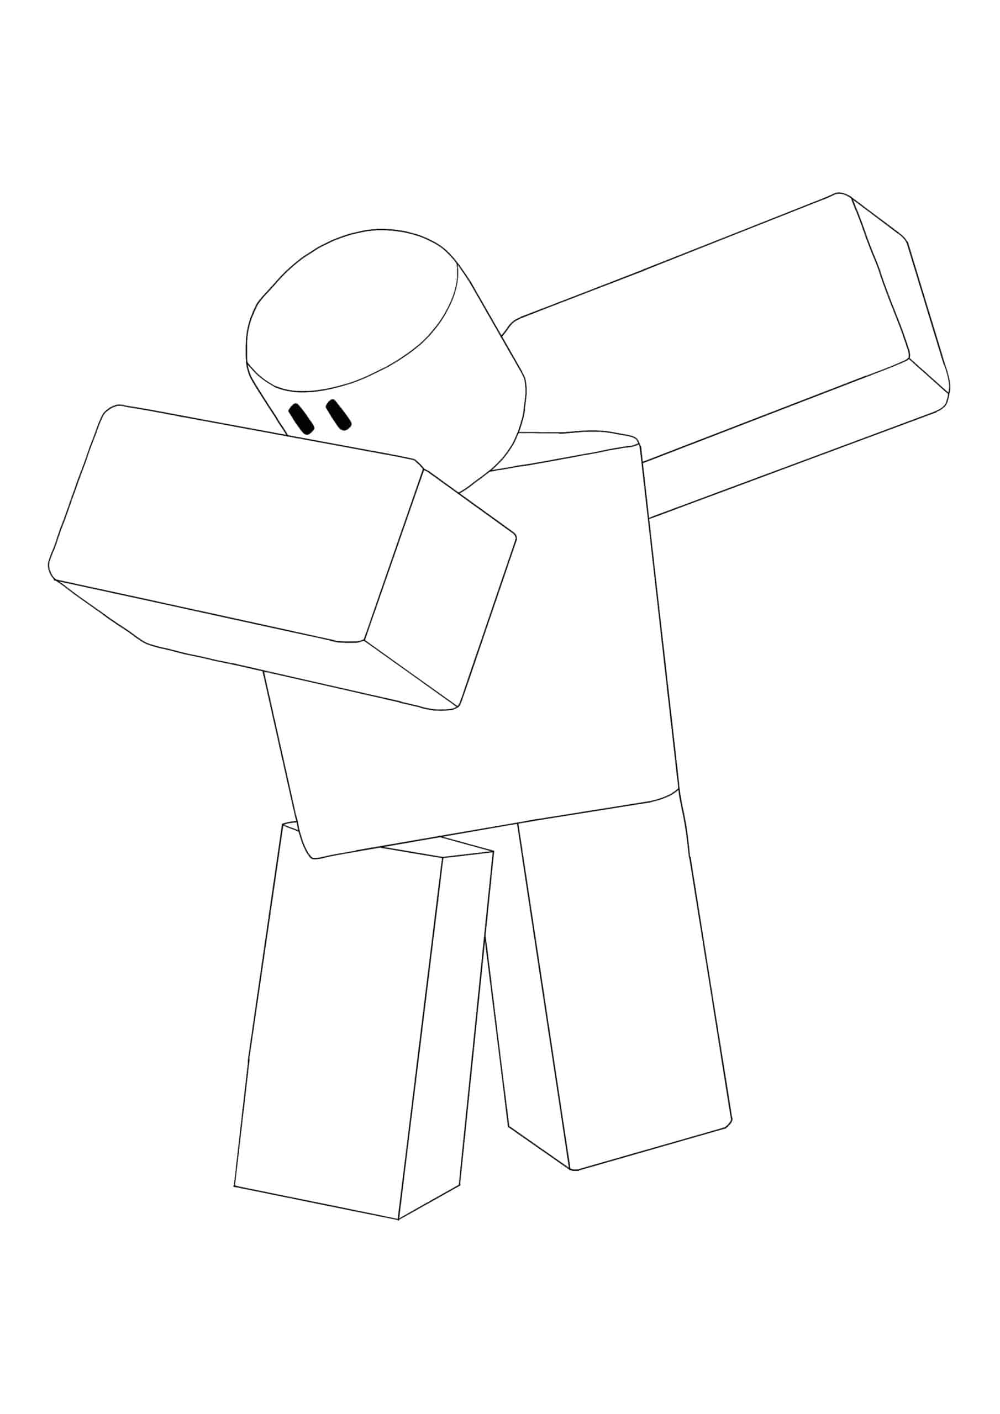 Roblox Noob Coloring Pages - 2 Free Coloring Sheets (2021) | Free printable coloring  sheets, Coloring pages, Free printable coloring